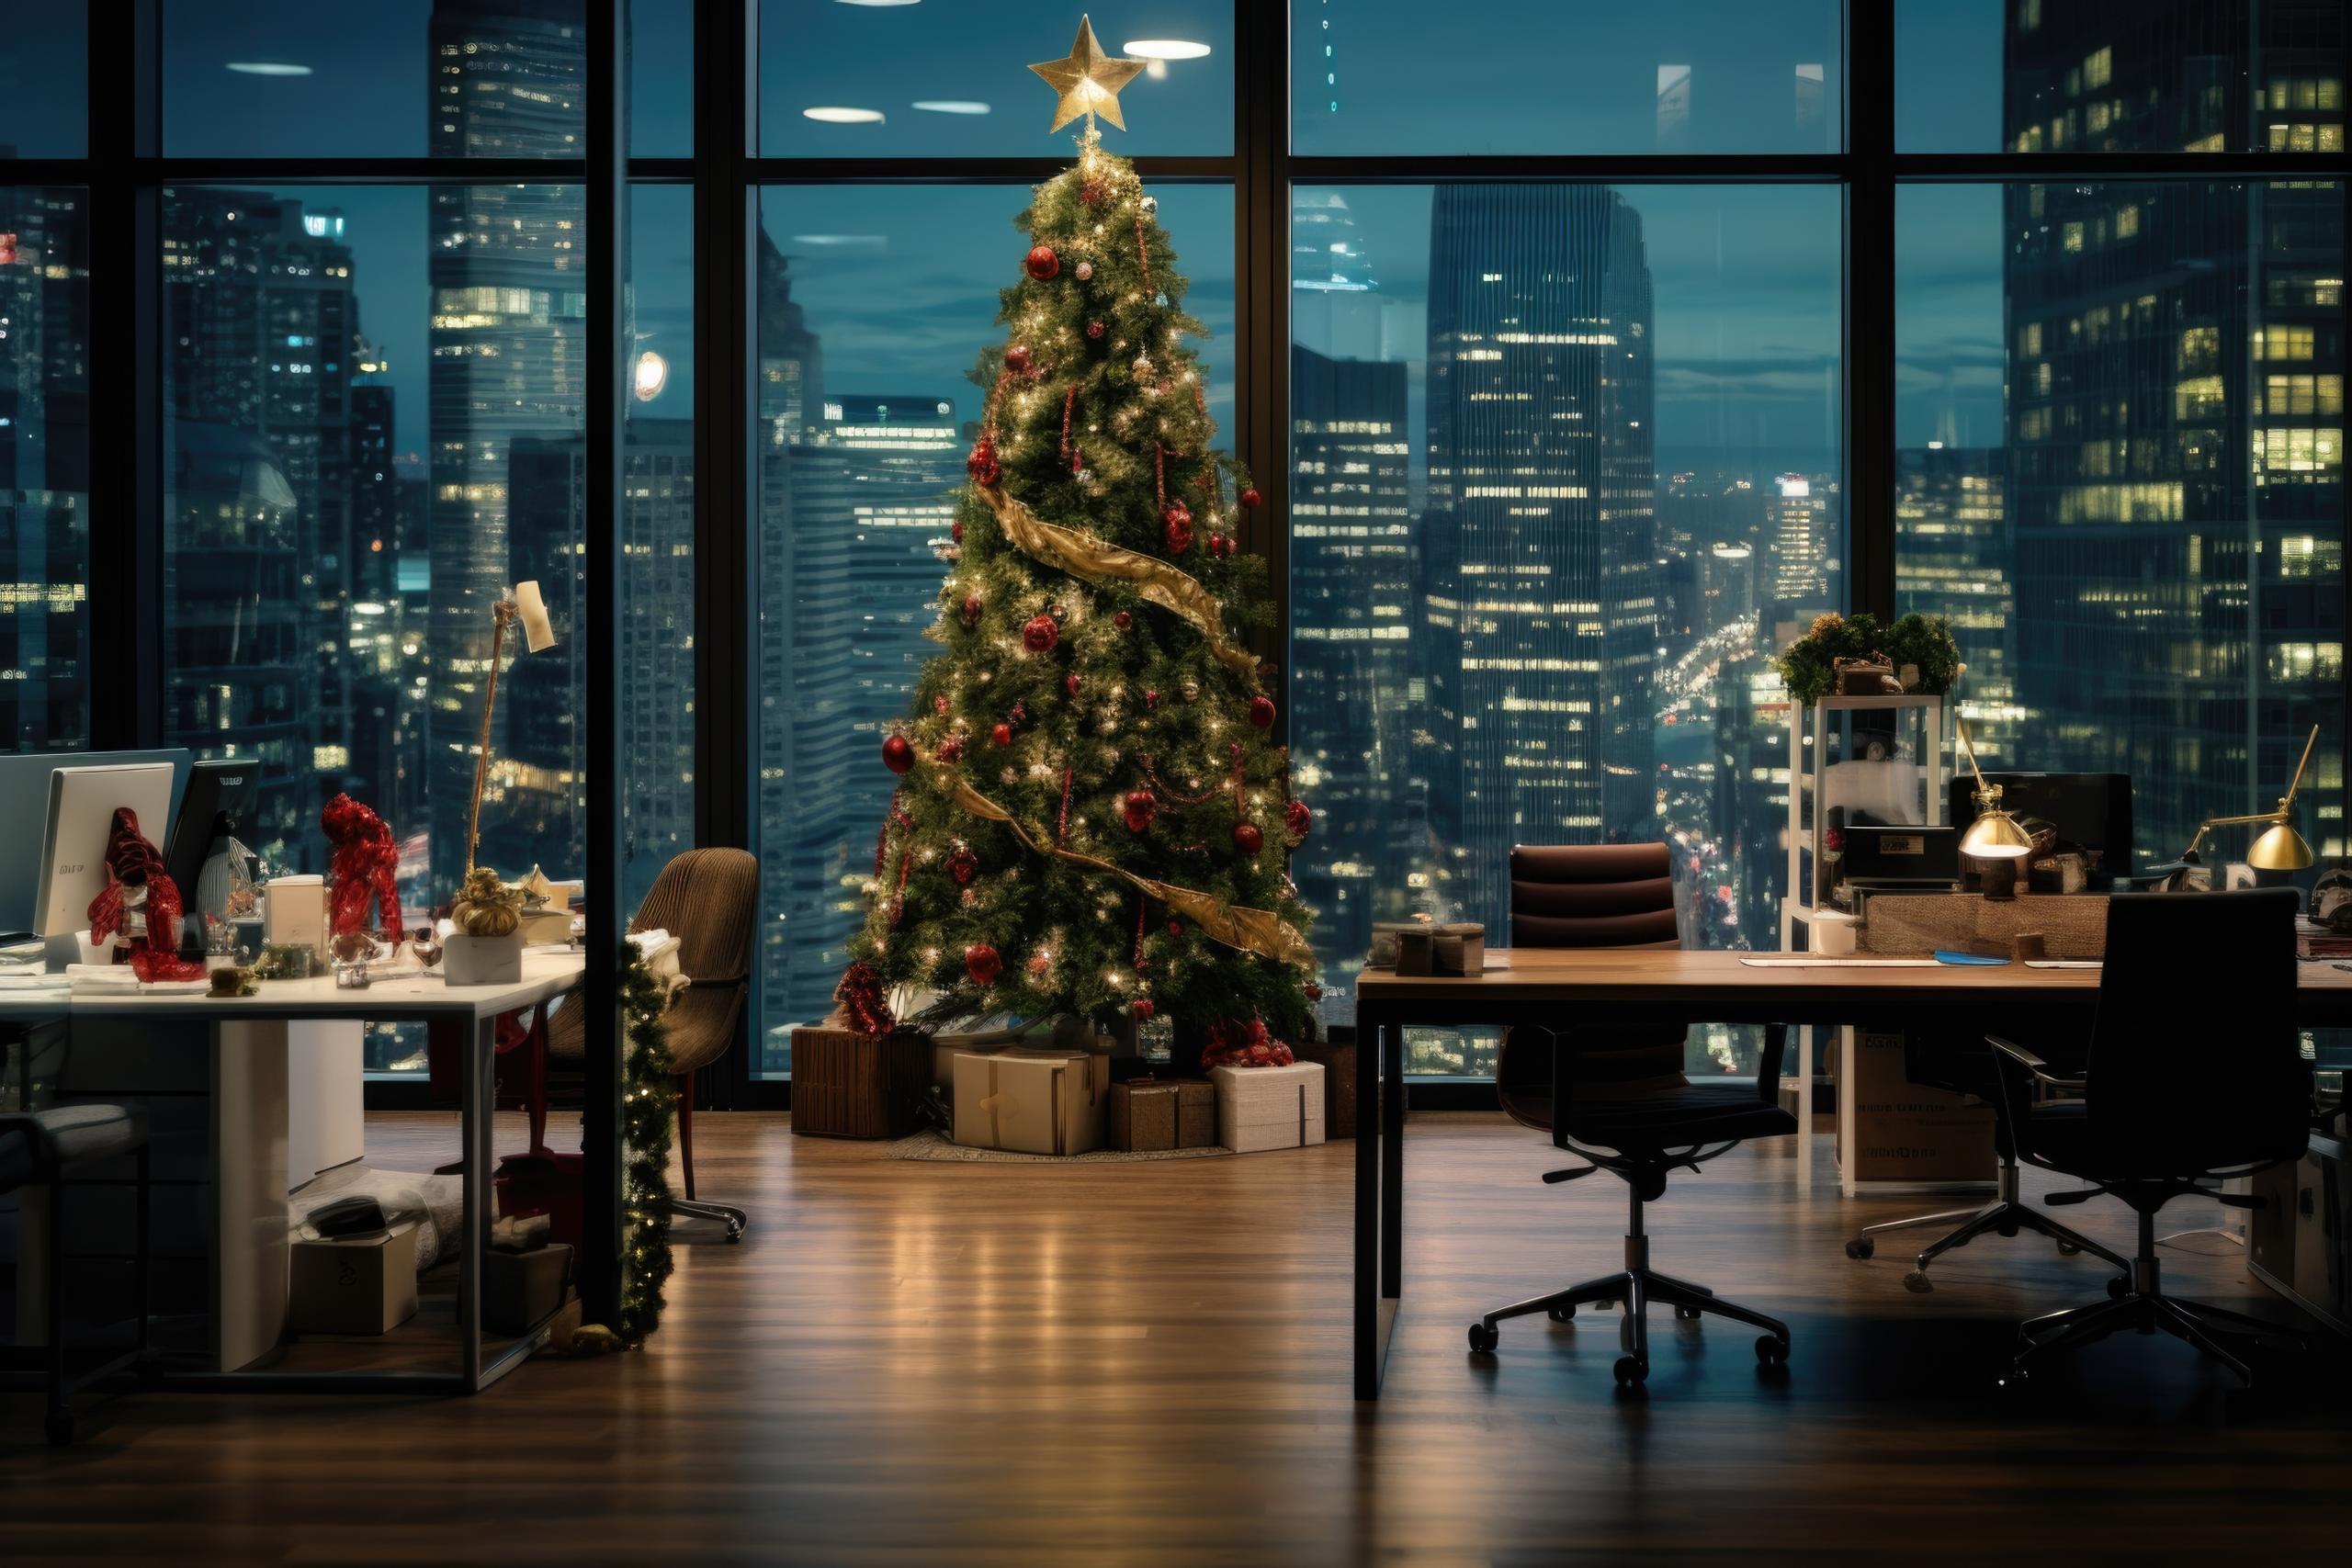 Deck the Halls or Keep the Cubicles Open? Navigating the Christmas Work Season